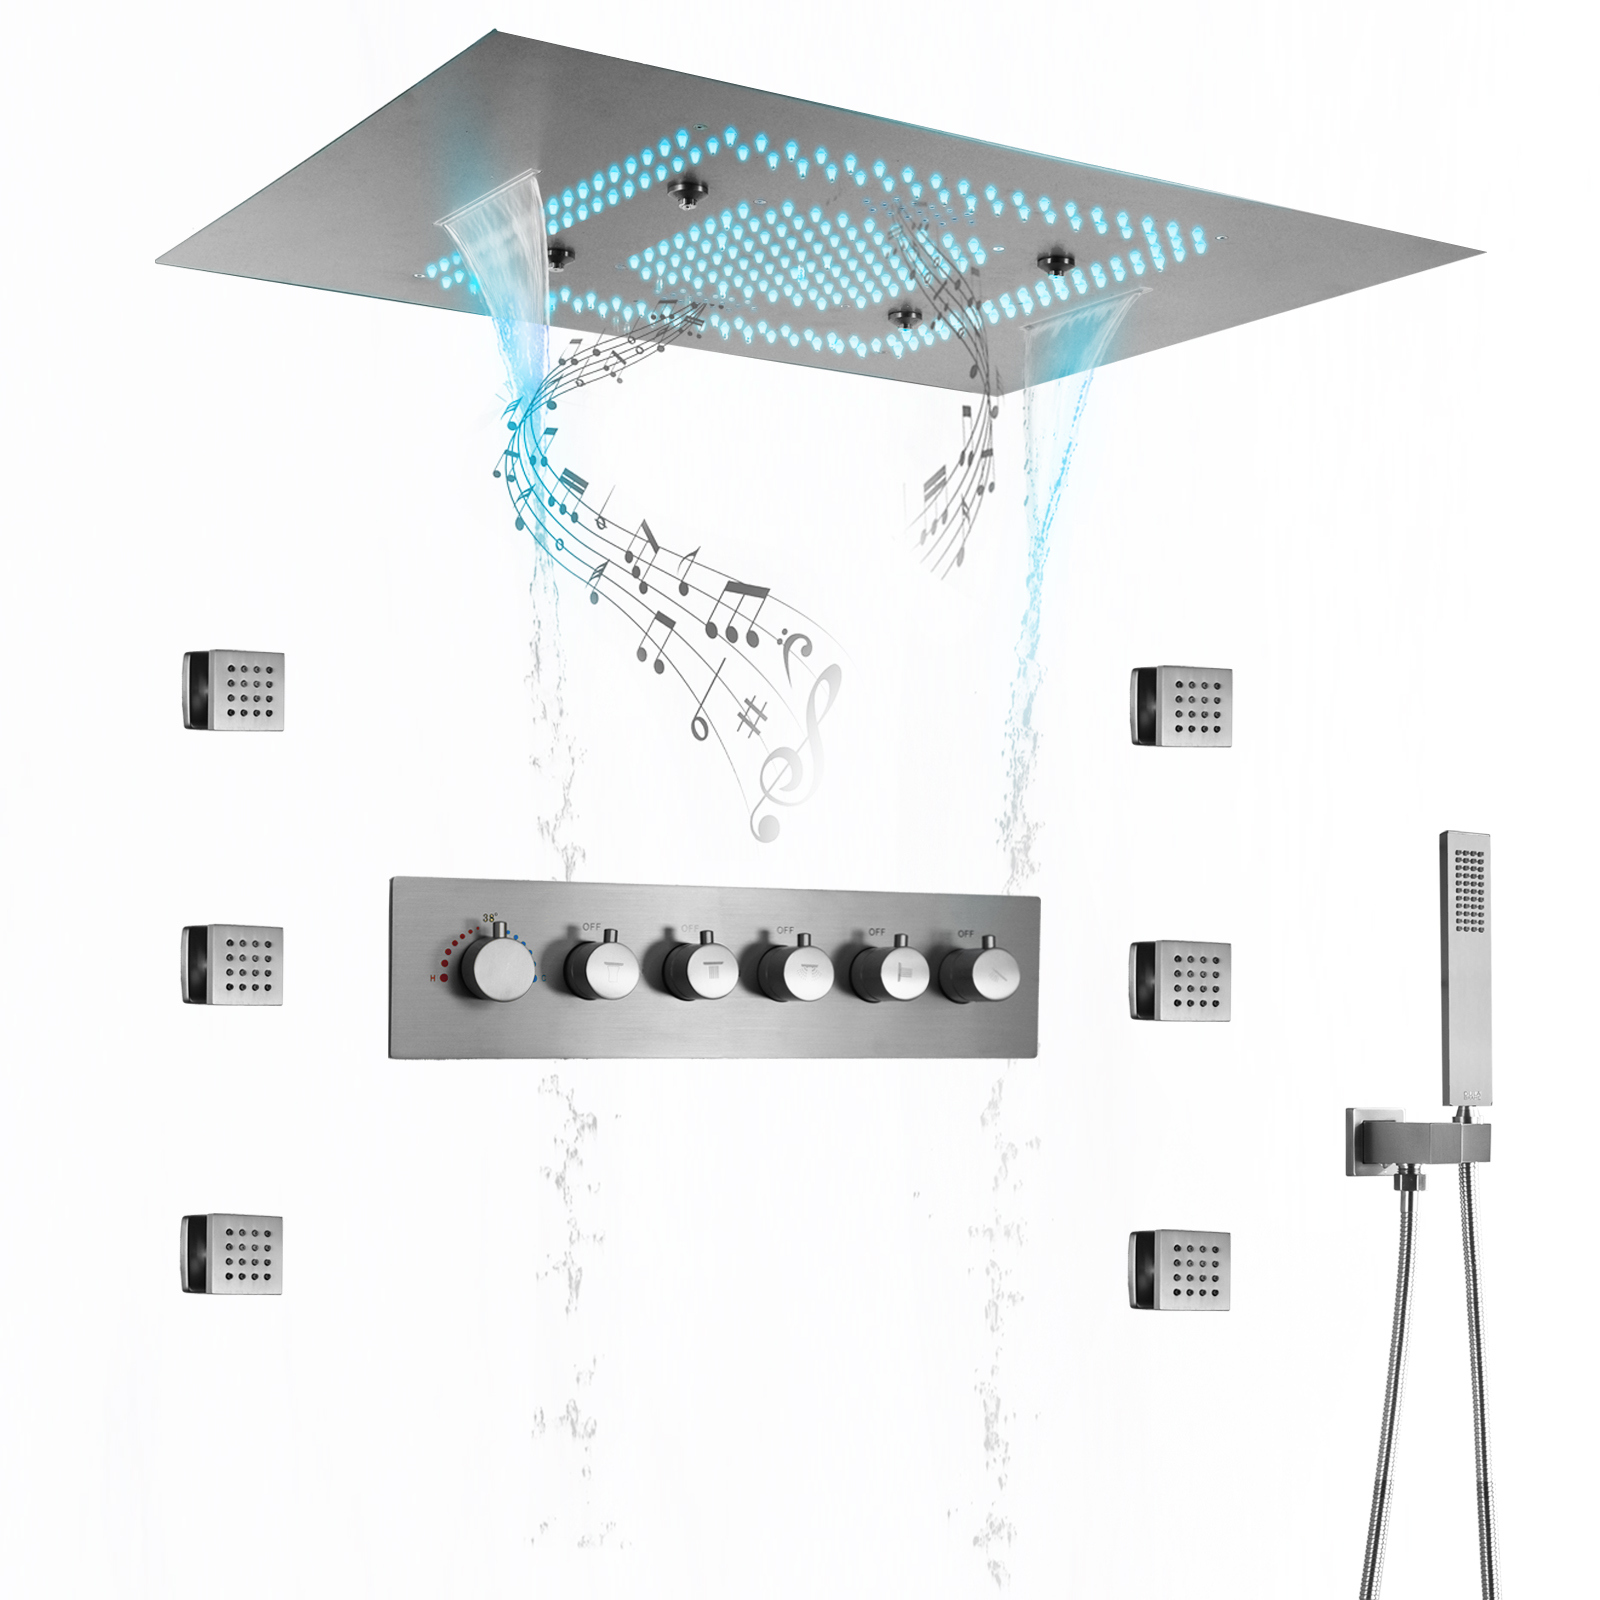 Ceiling Embedded 600*800mm Led Shower Head With Music Speakers Thermostatic Main Body Bathroom Shower Faucet